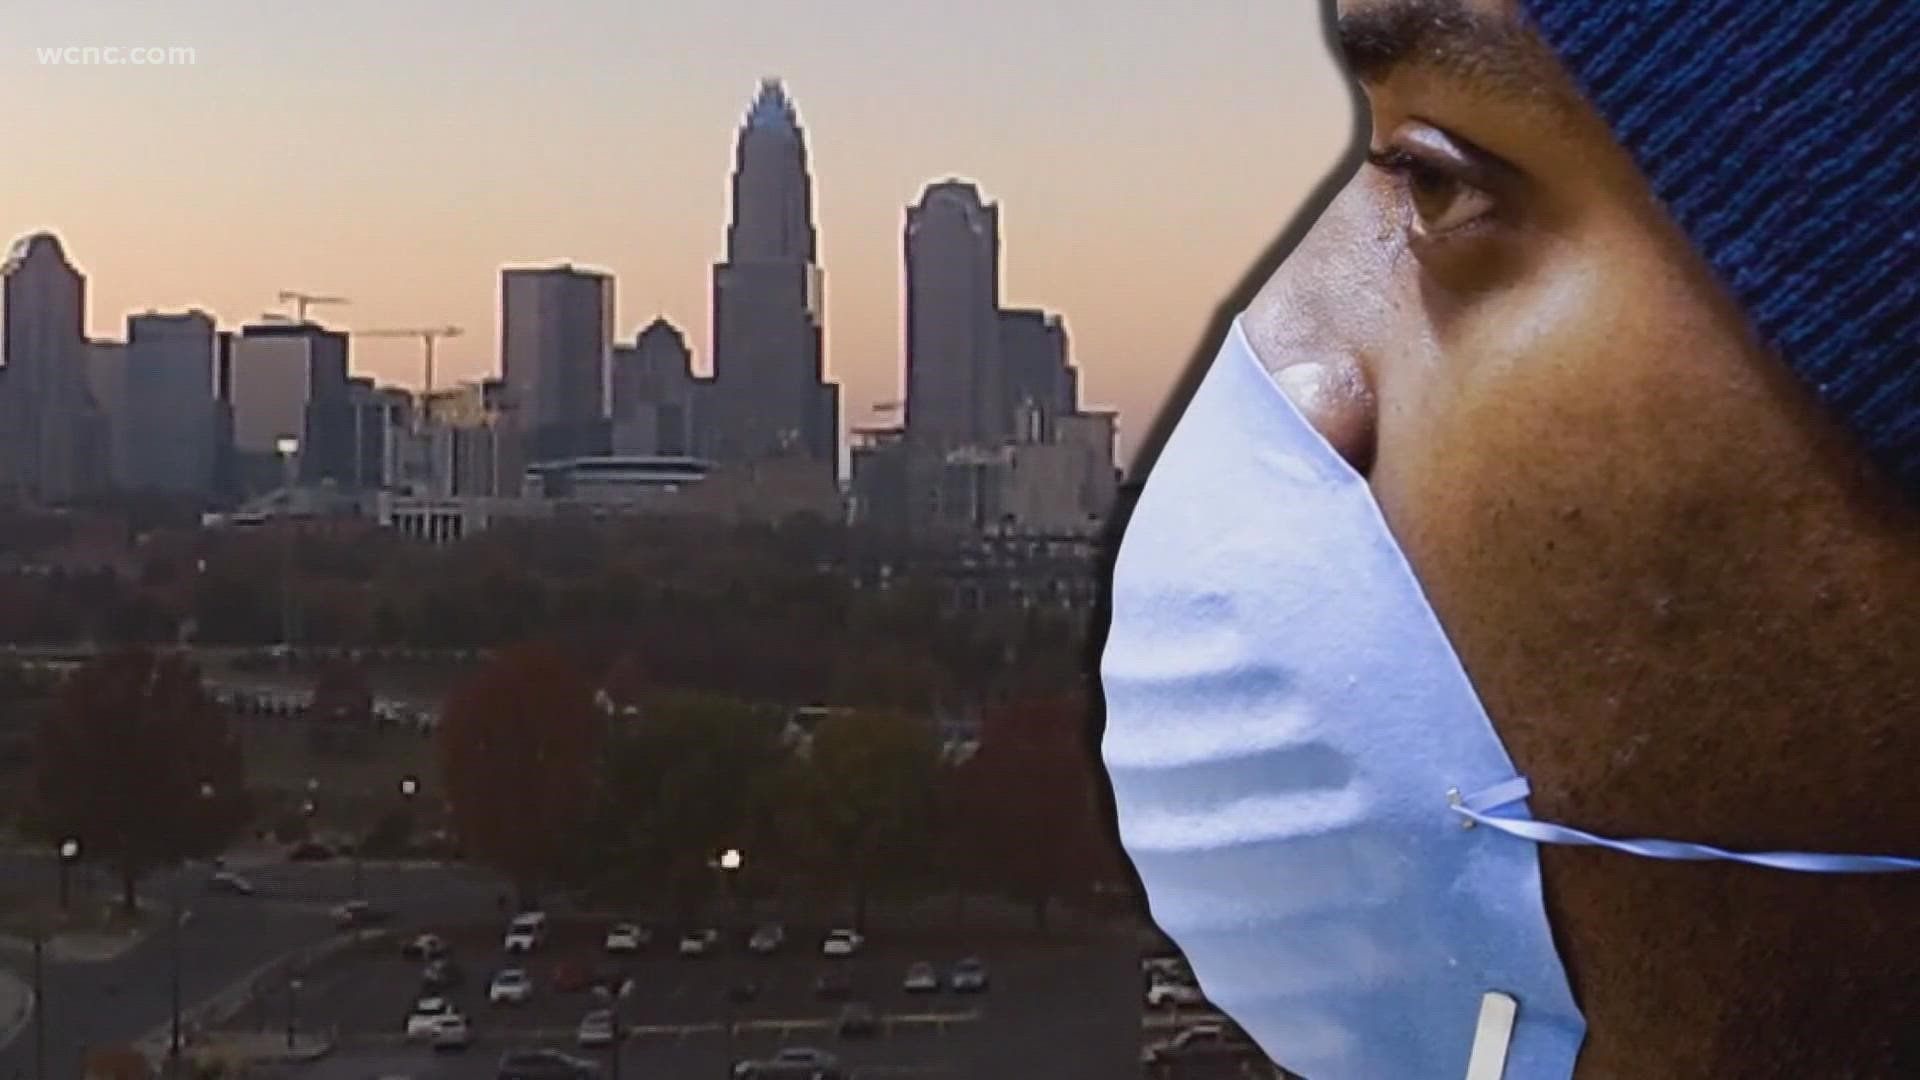 Mecklenburg County leaders are keeping a close eye on COVID-19 numbers, in anticipation of possibly ending the face mask mandate.